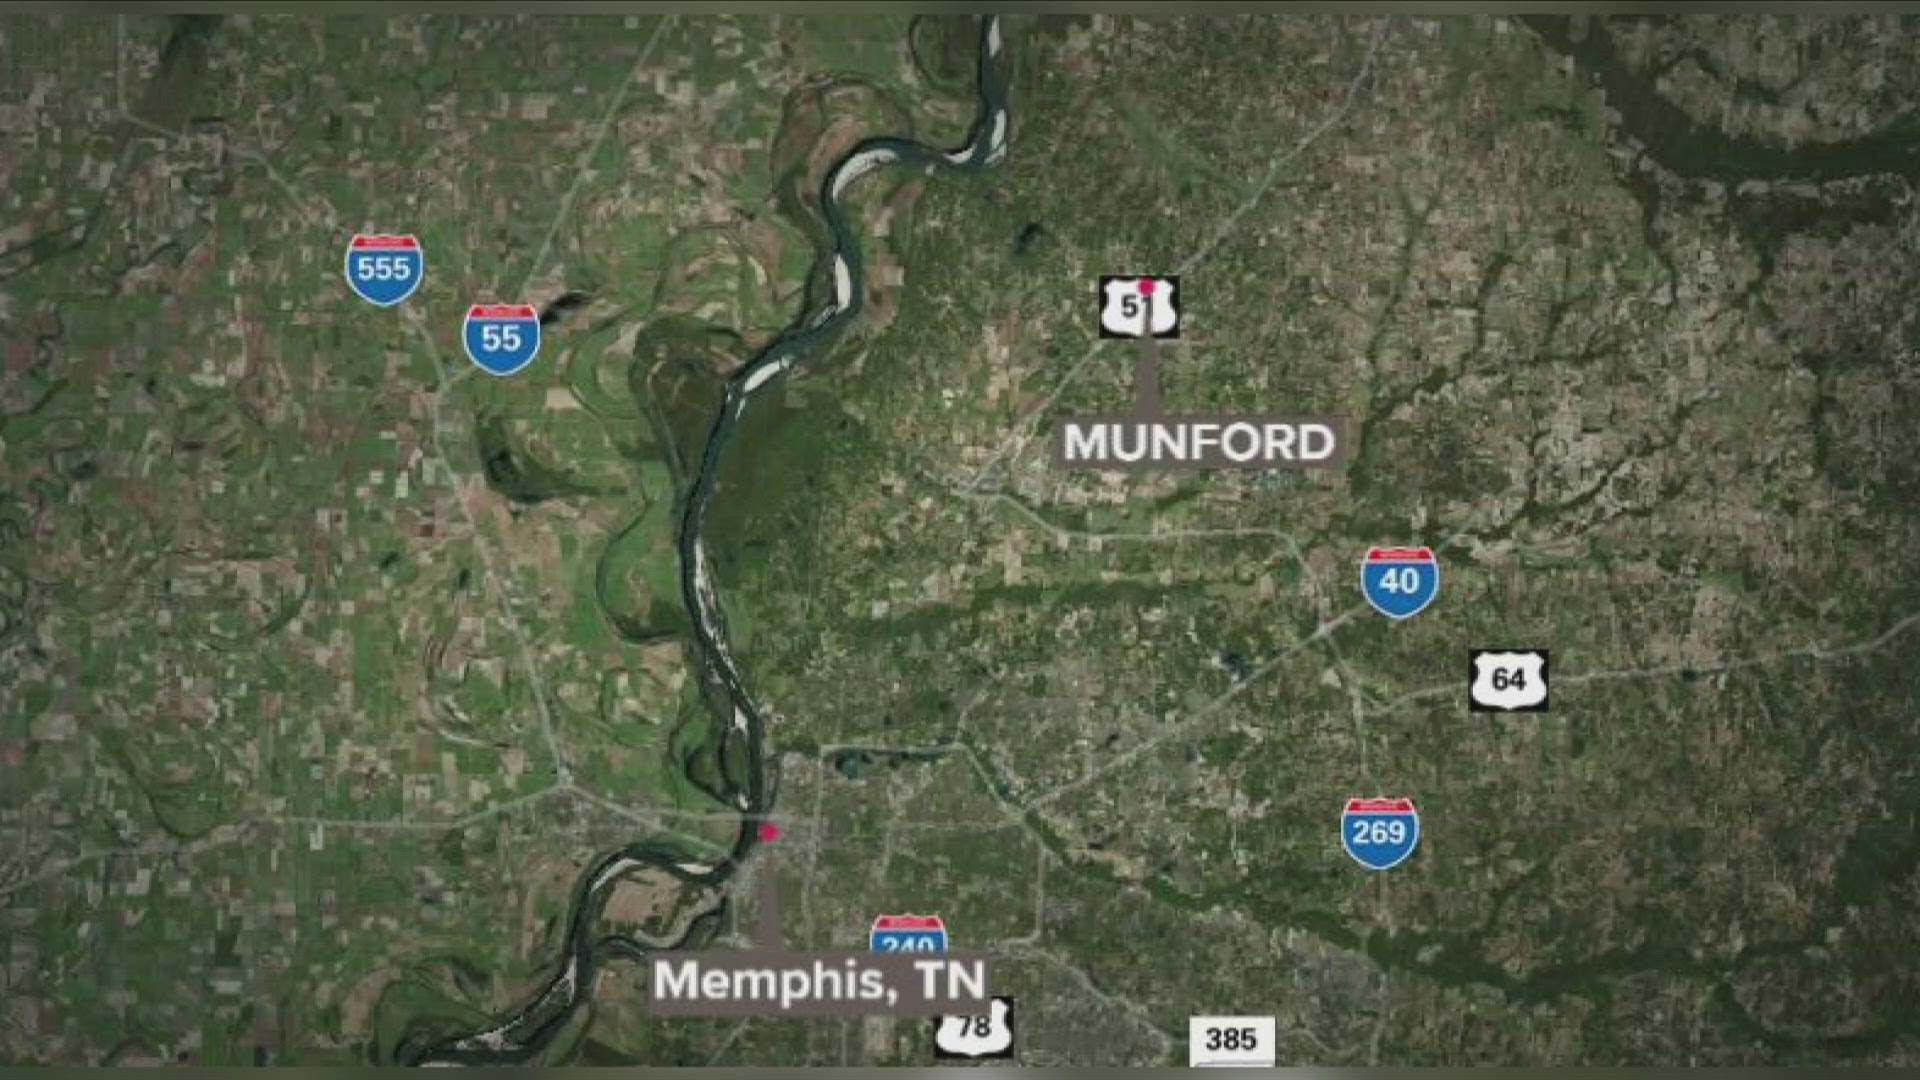 A teenager was found near a high school in Munford, Tennessee with what appeared to be a gunshot wound to the leg, according to Munford Police.